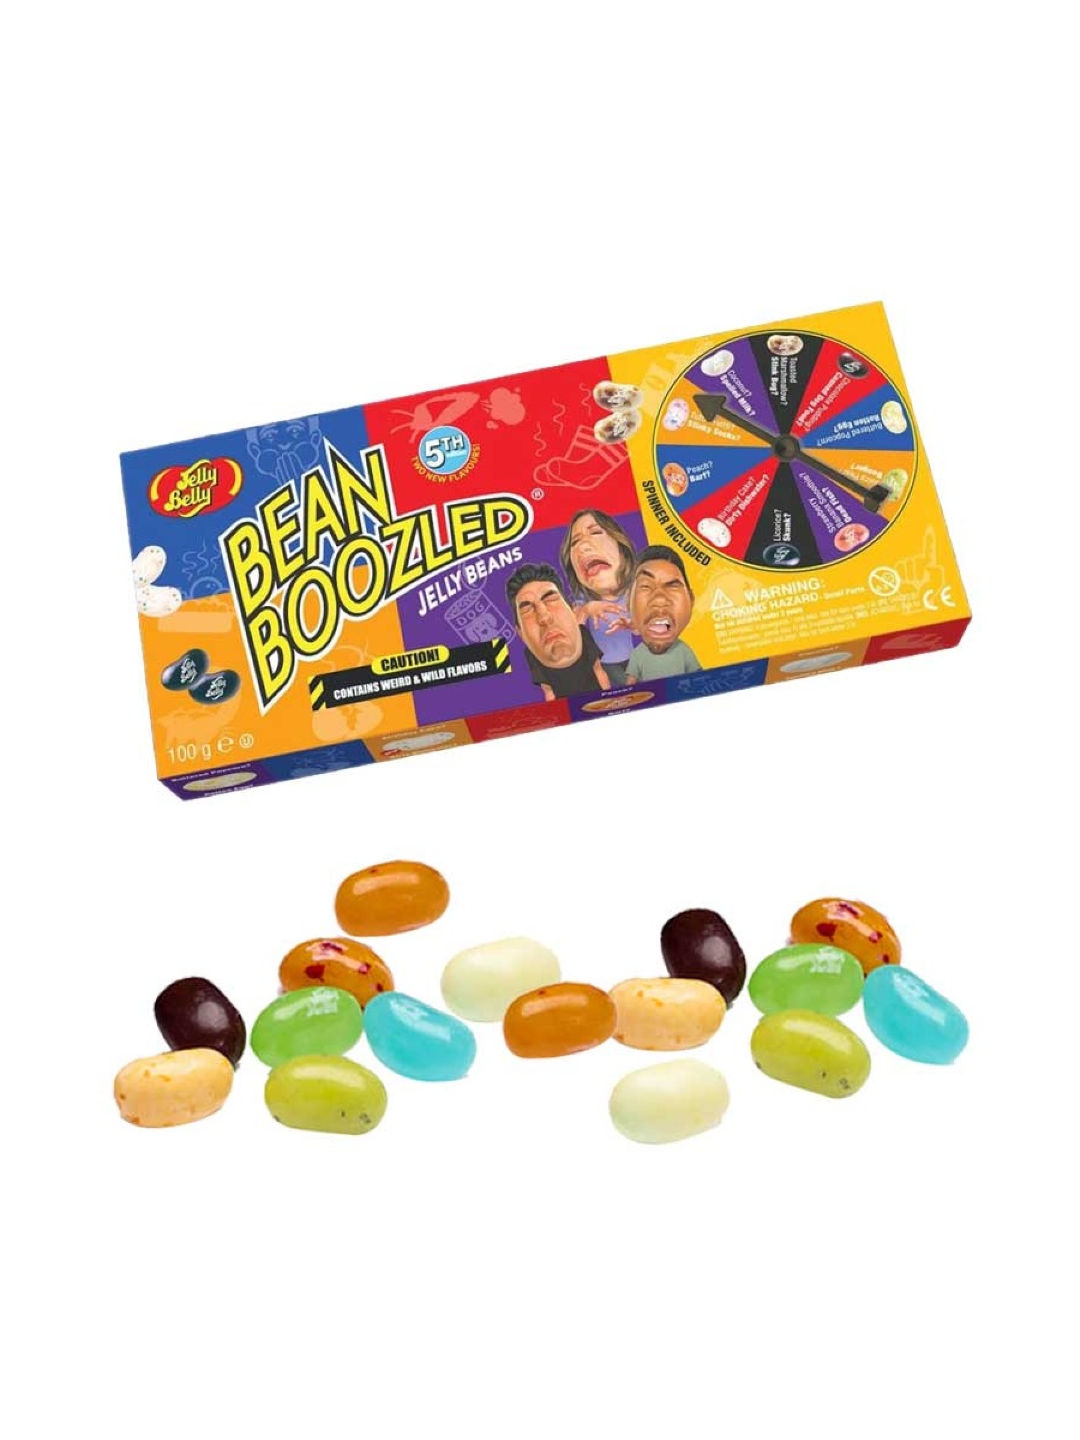 Jelly Belly Candy Corner Bean Boozled Spinner Gift Box (100g)